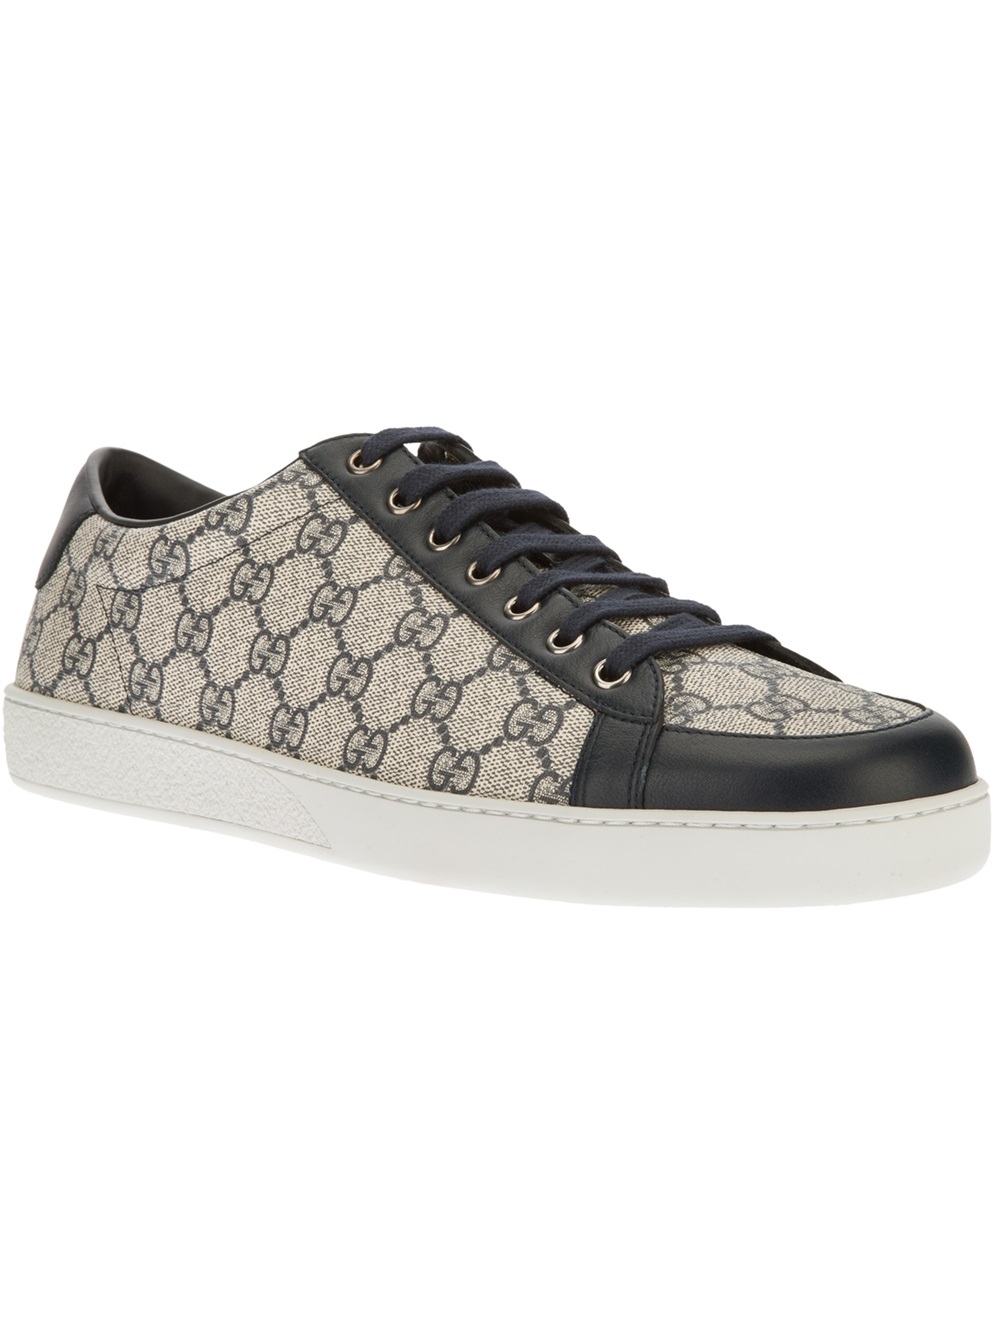 Lyst - Gucci Trainer in Black for Men